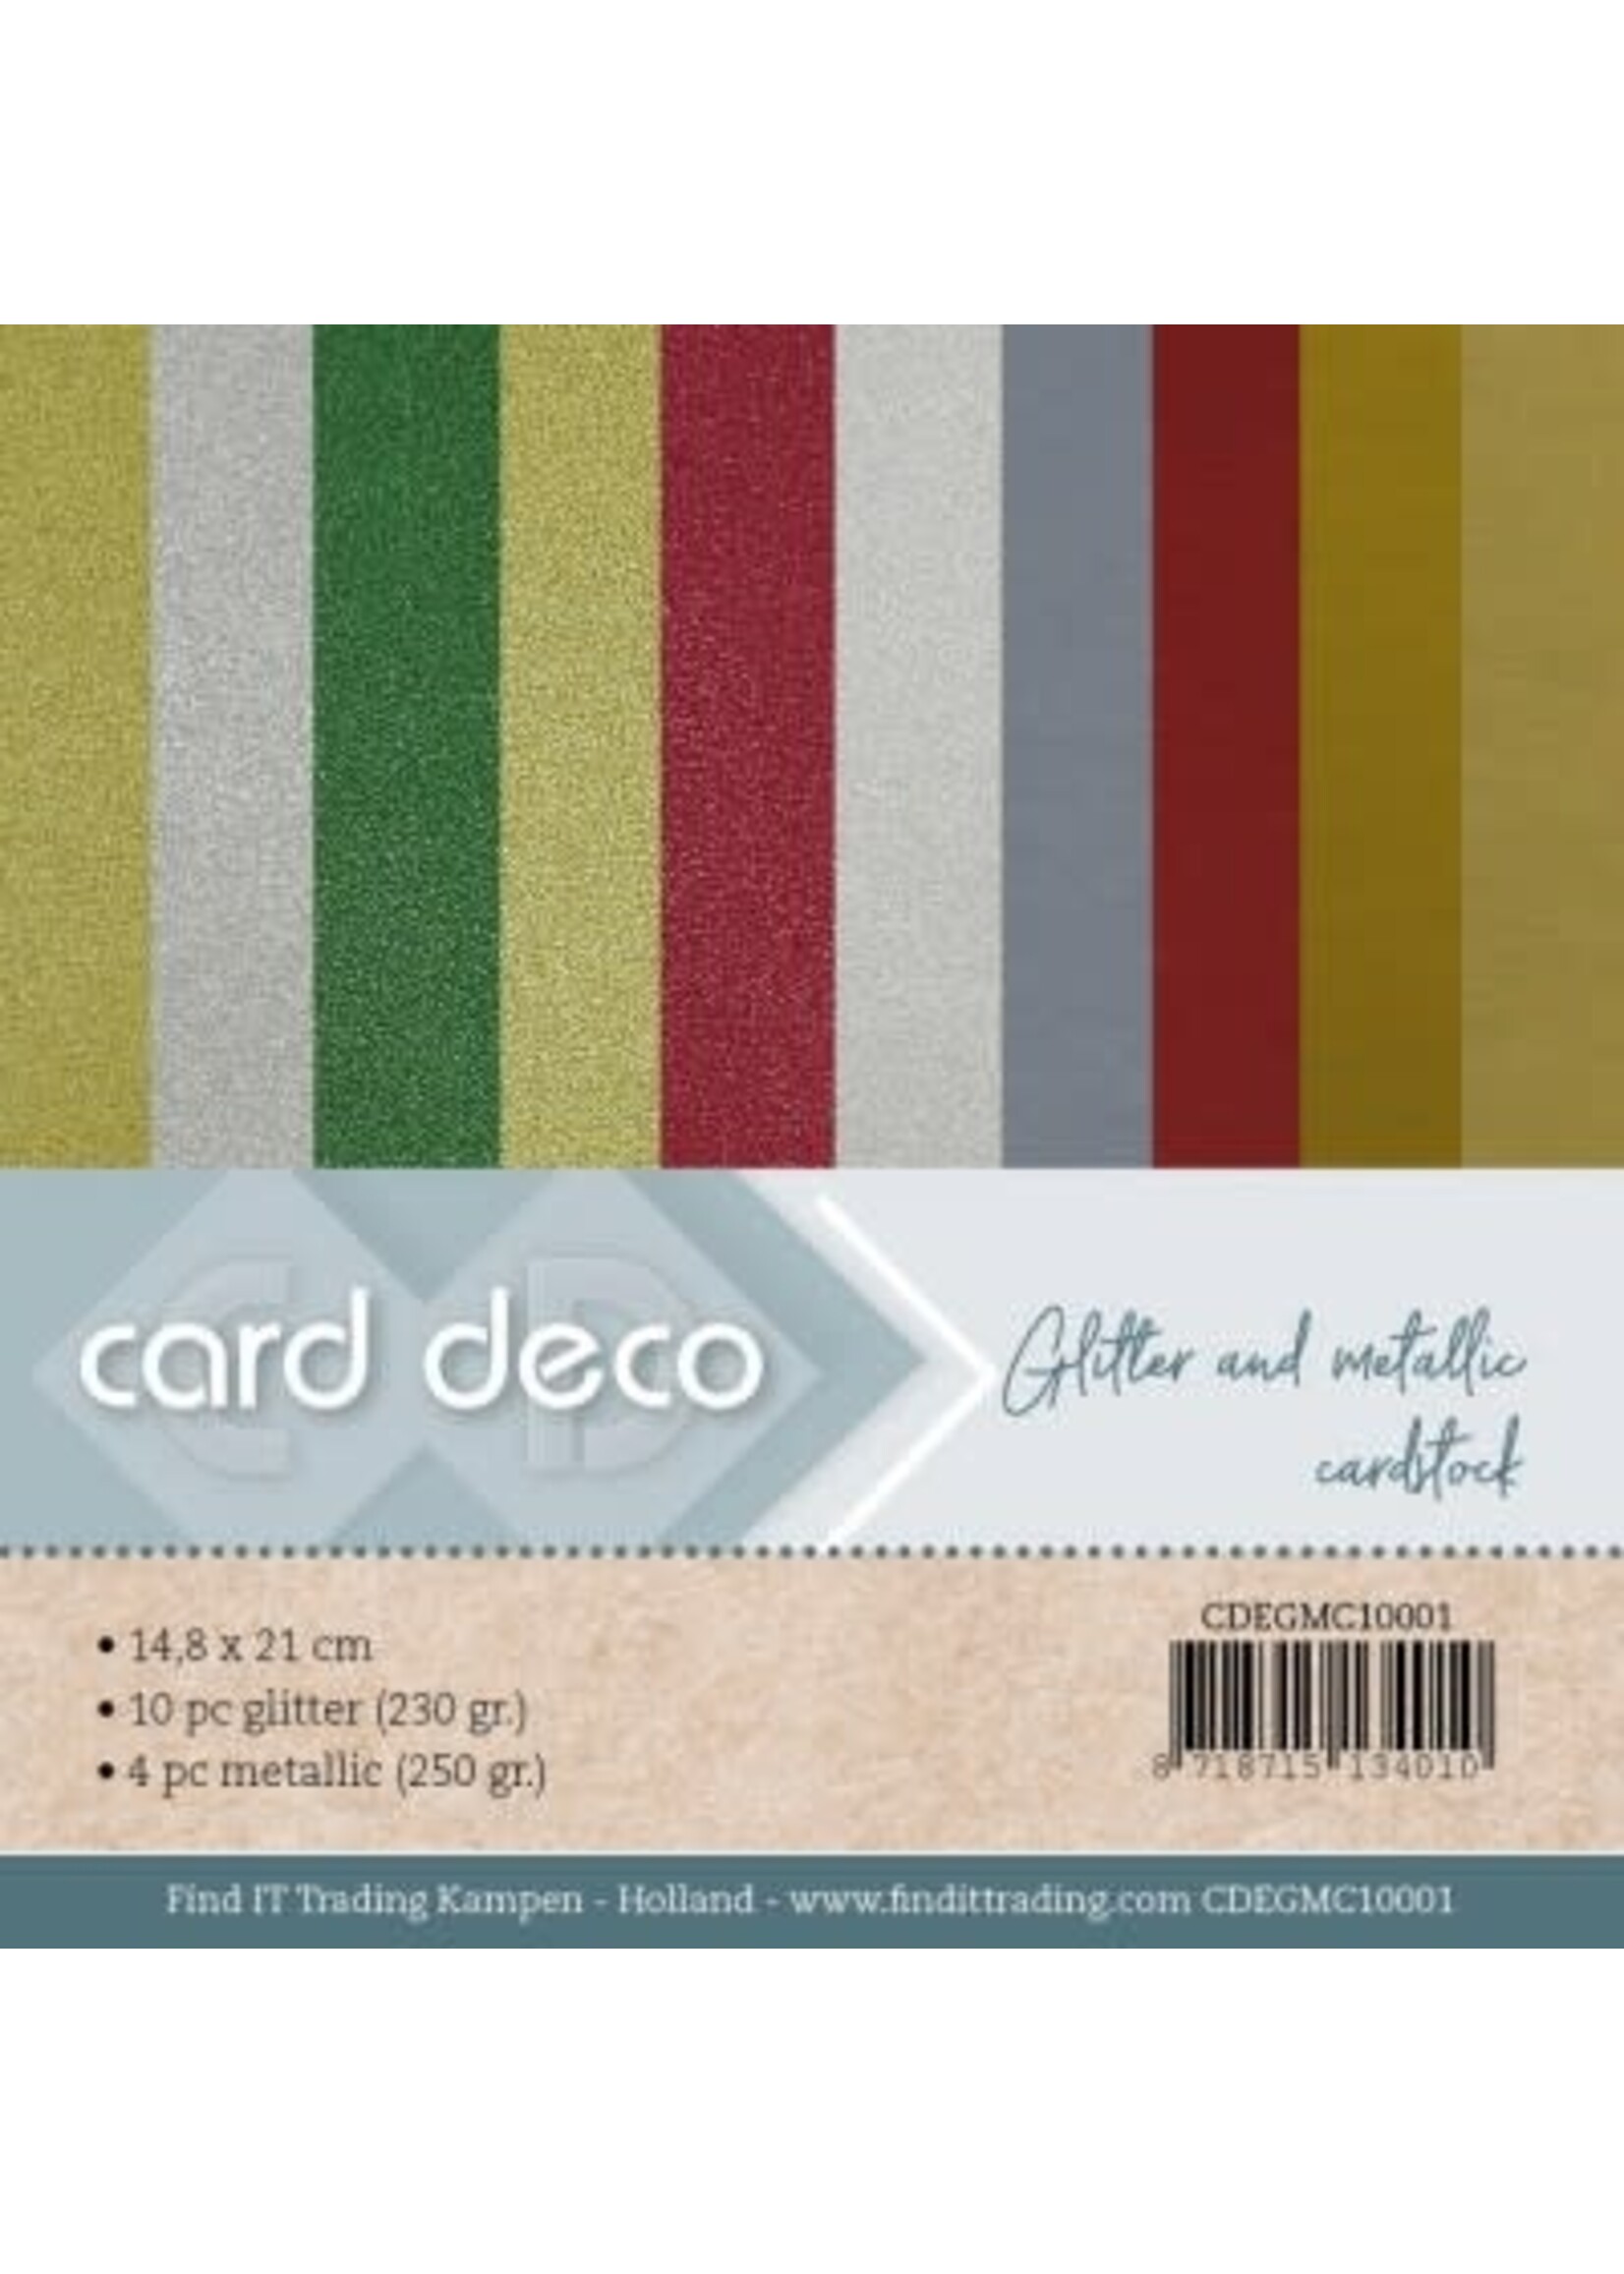 carddeco Card Deco Essentials - Glitter And Metallic Cardstock - Christmas A5